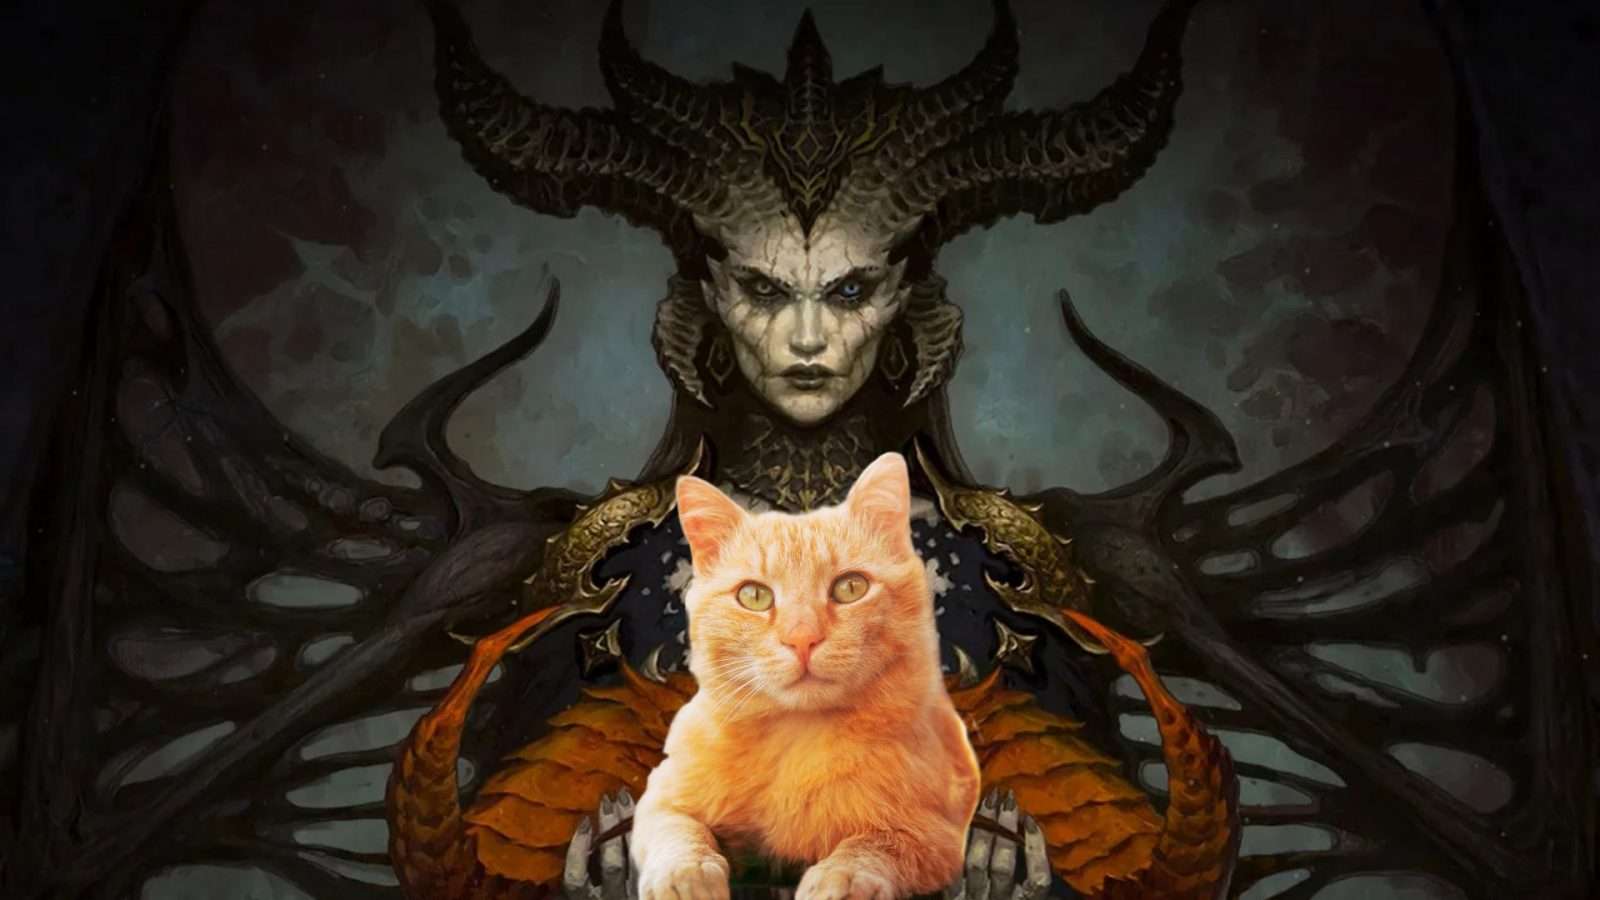 lilith holding cat in diablo 4